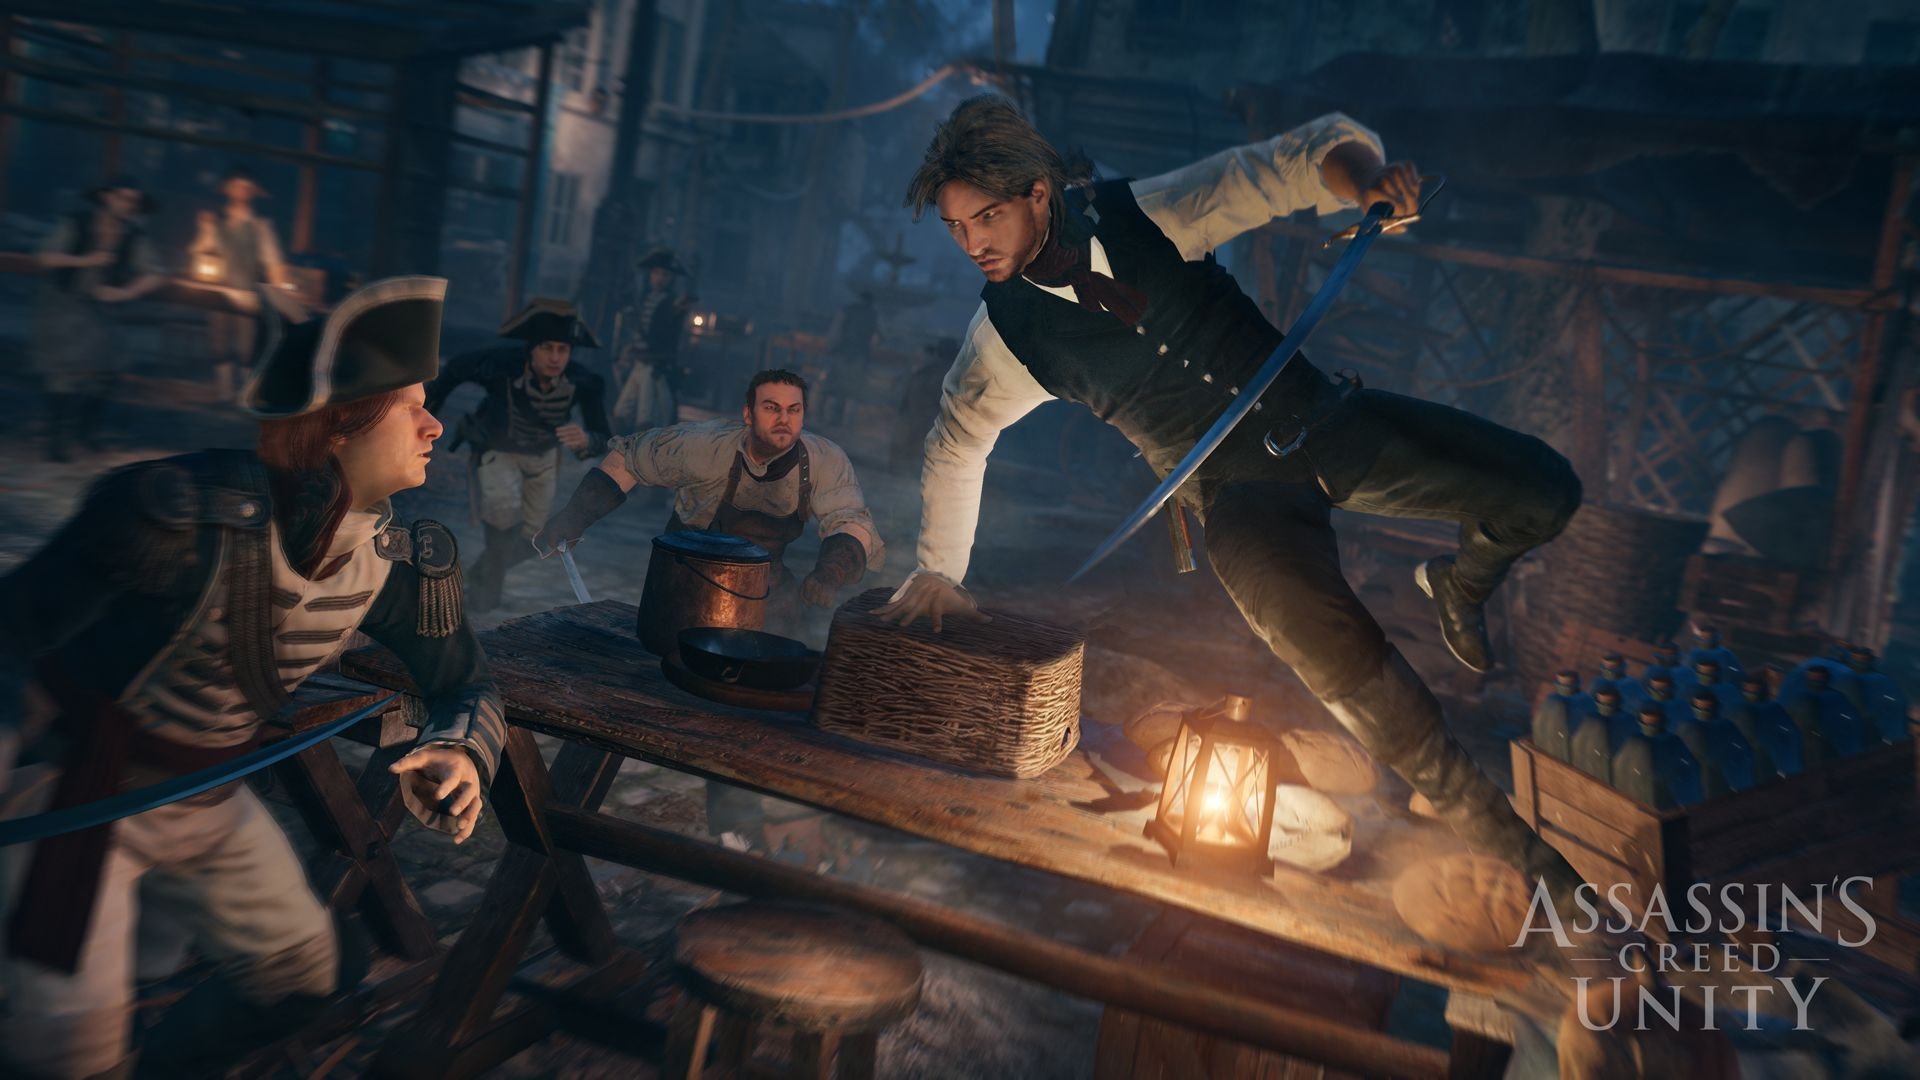 Free Download Assassin's Creed - Assassin's Creed Unity 2014 , HD Wallpaper & Backgrounds